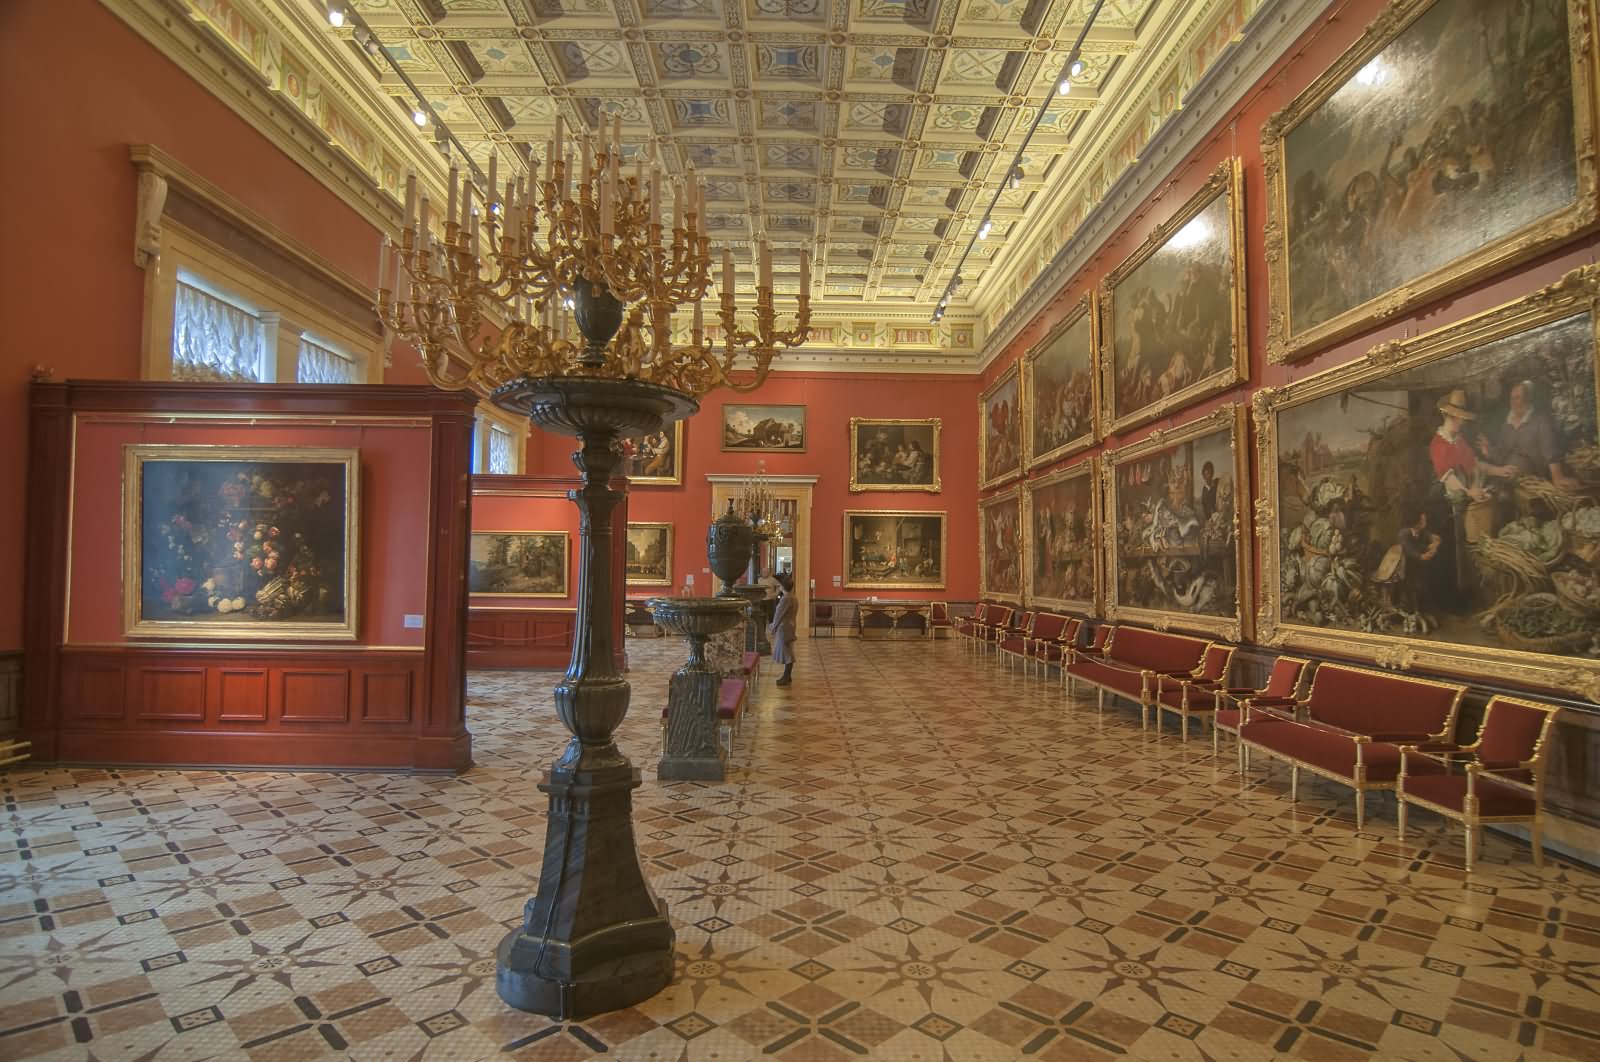 Interior View Of The Hermitage Museum In St. Petersburg